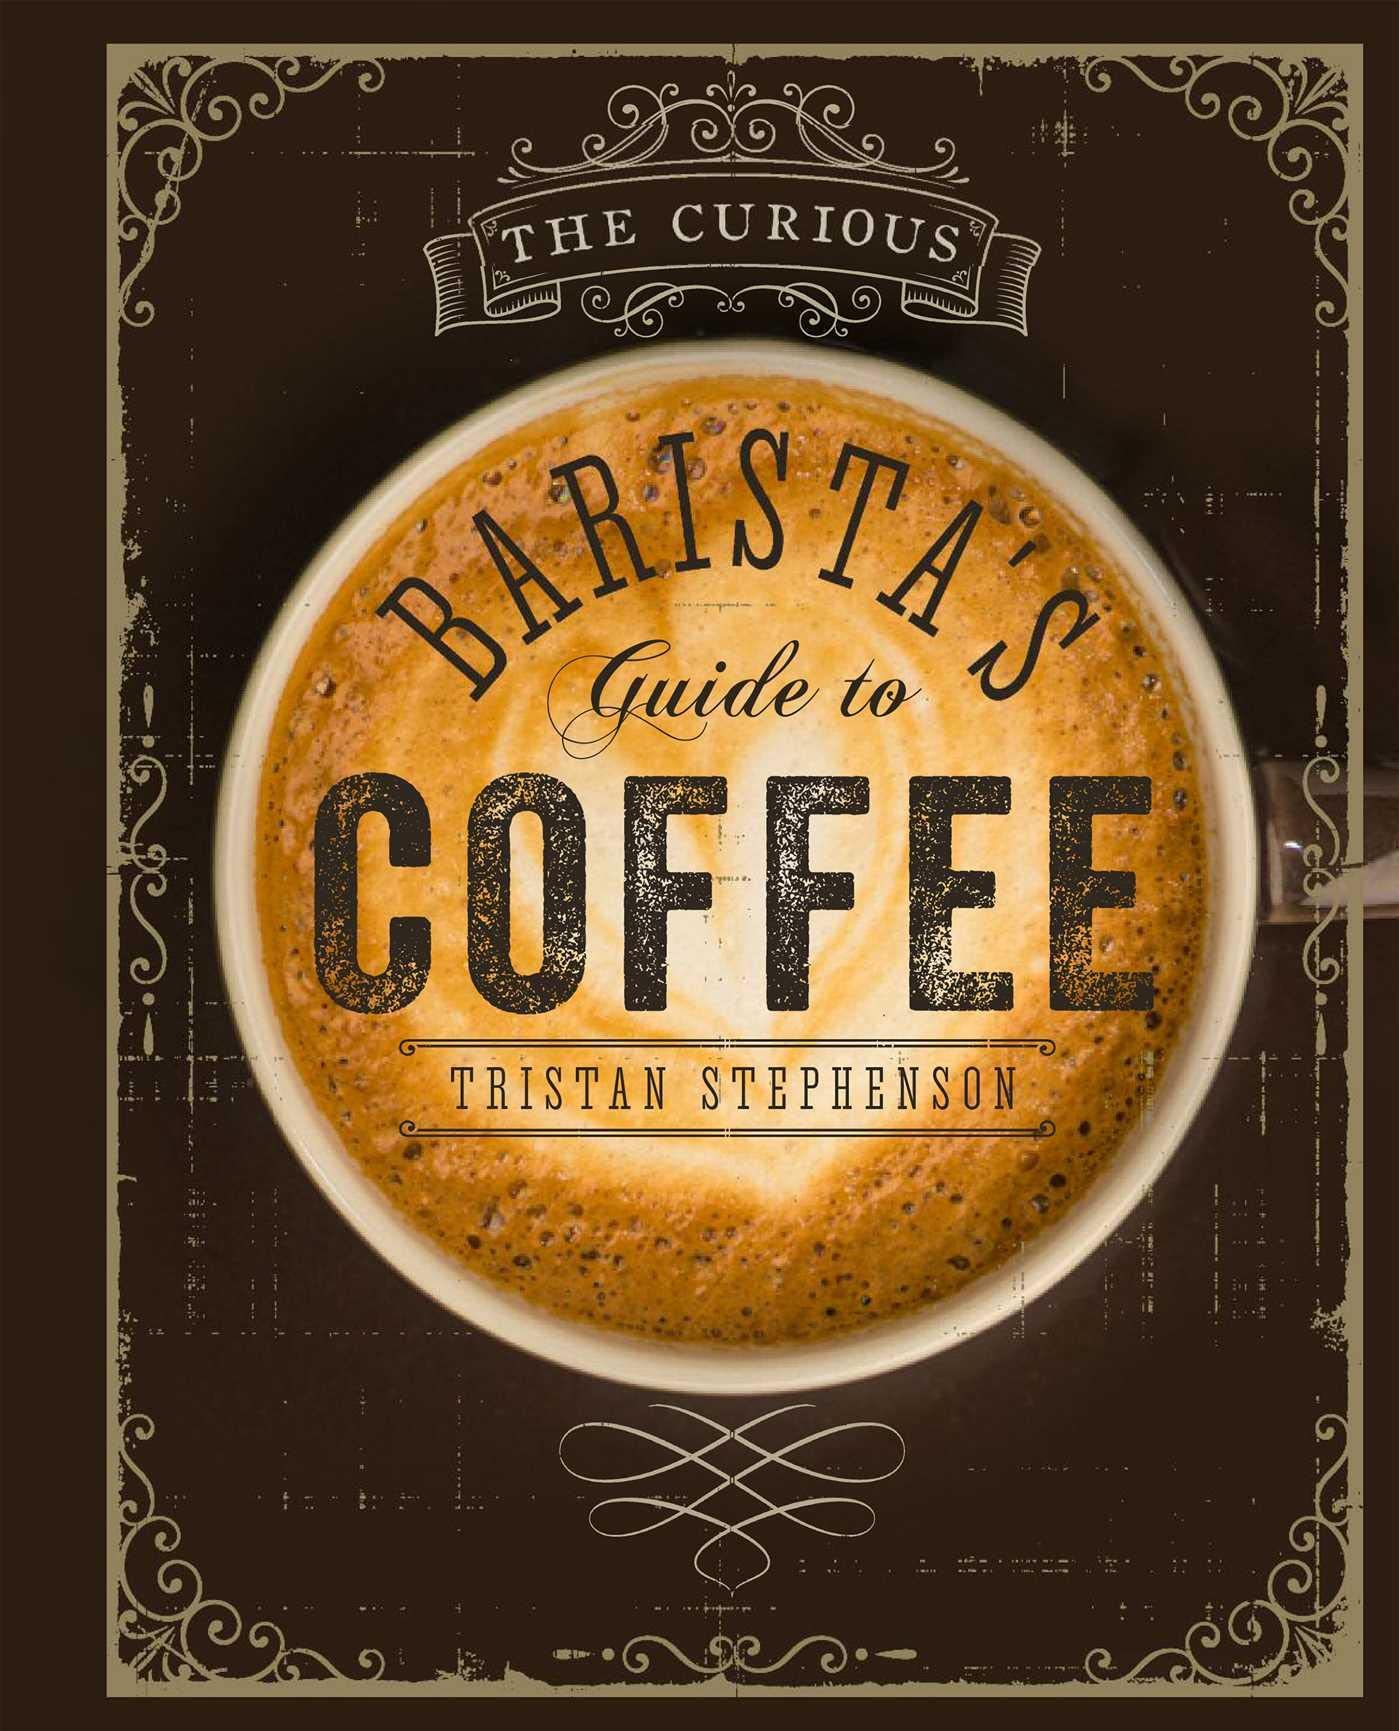 The Curious Barista's Guide to Coffee (Tristan Stephenson)